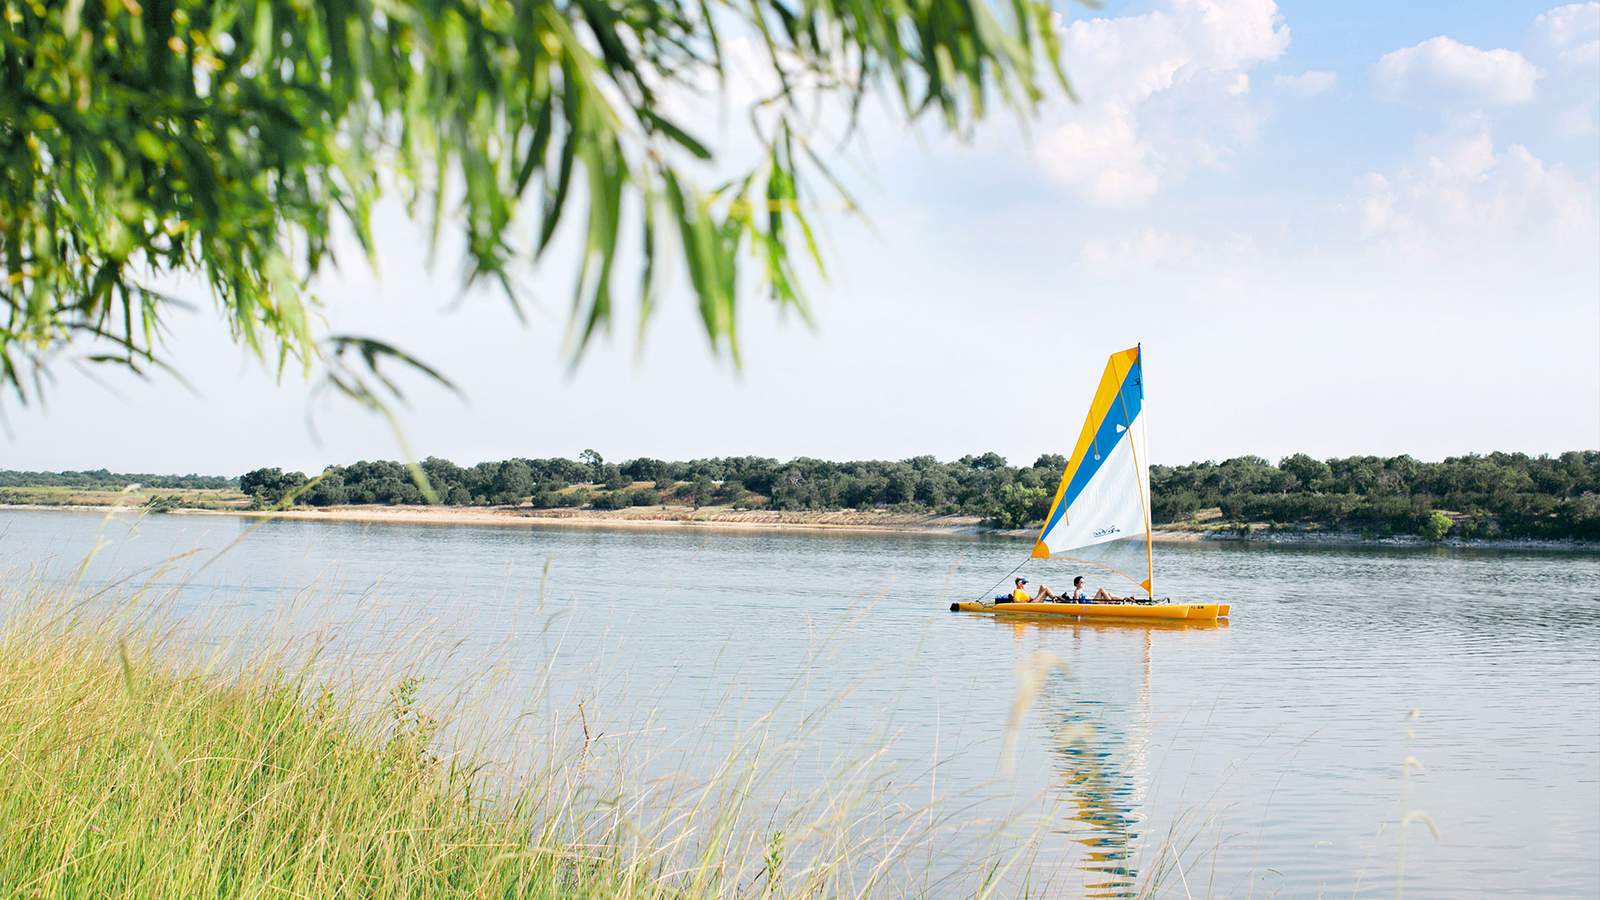 Boerne City Lake will temporarily close on weekends and holidays, including July 4